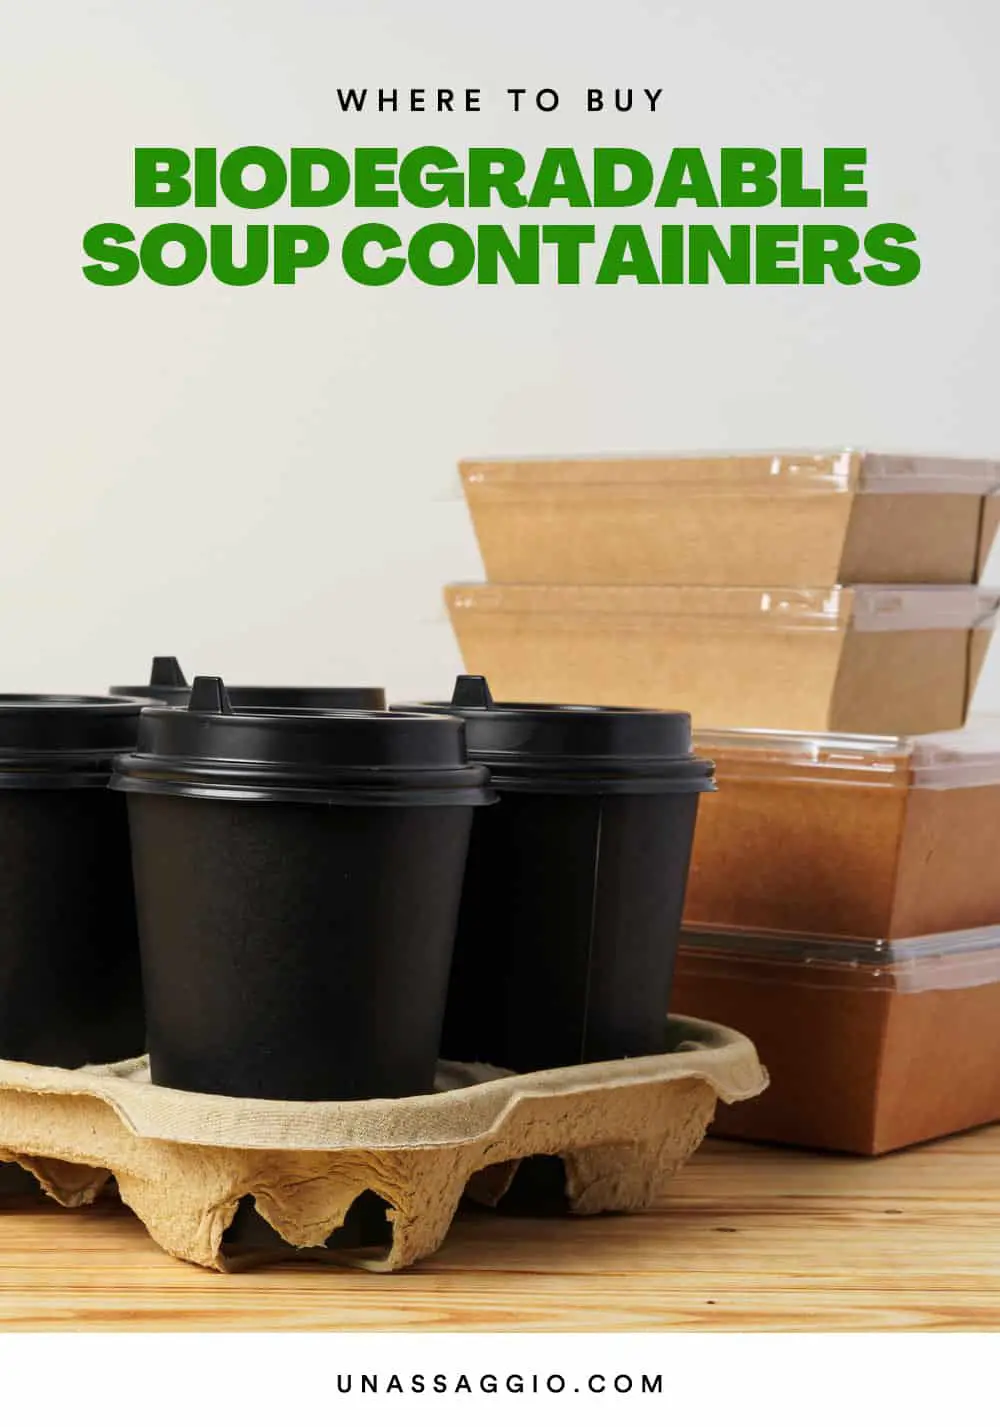 Biodegradable Soup Containers